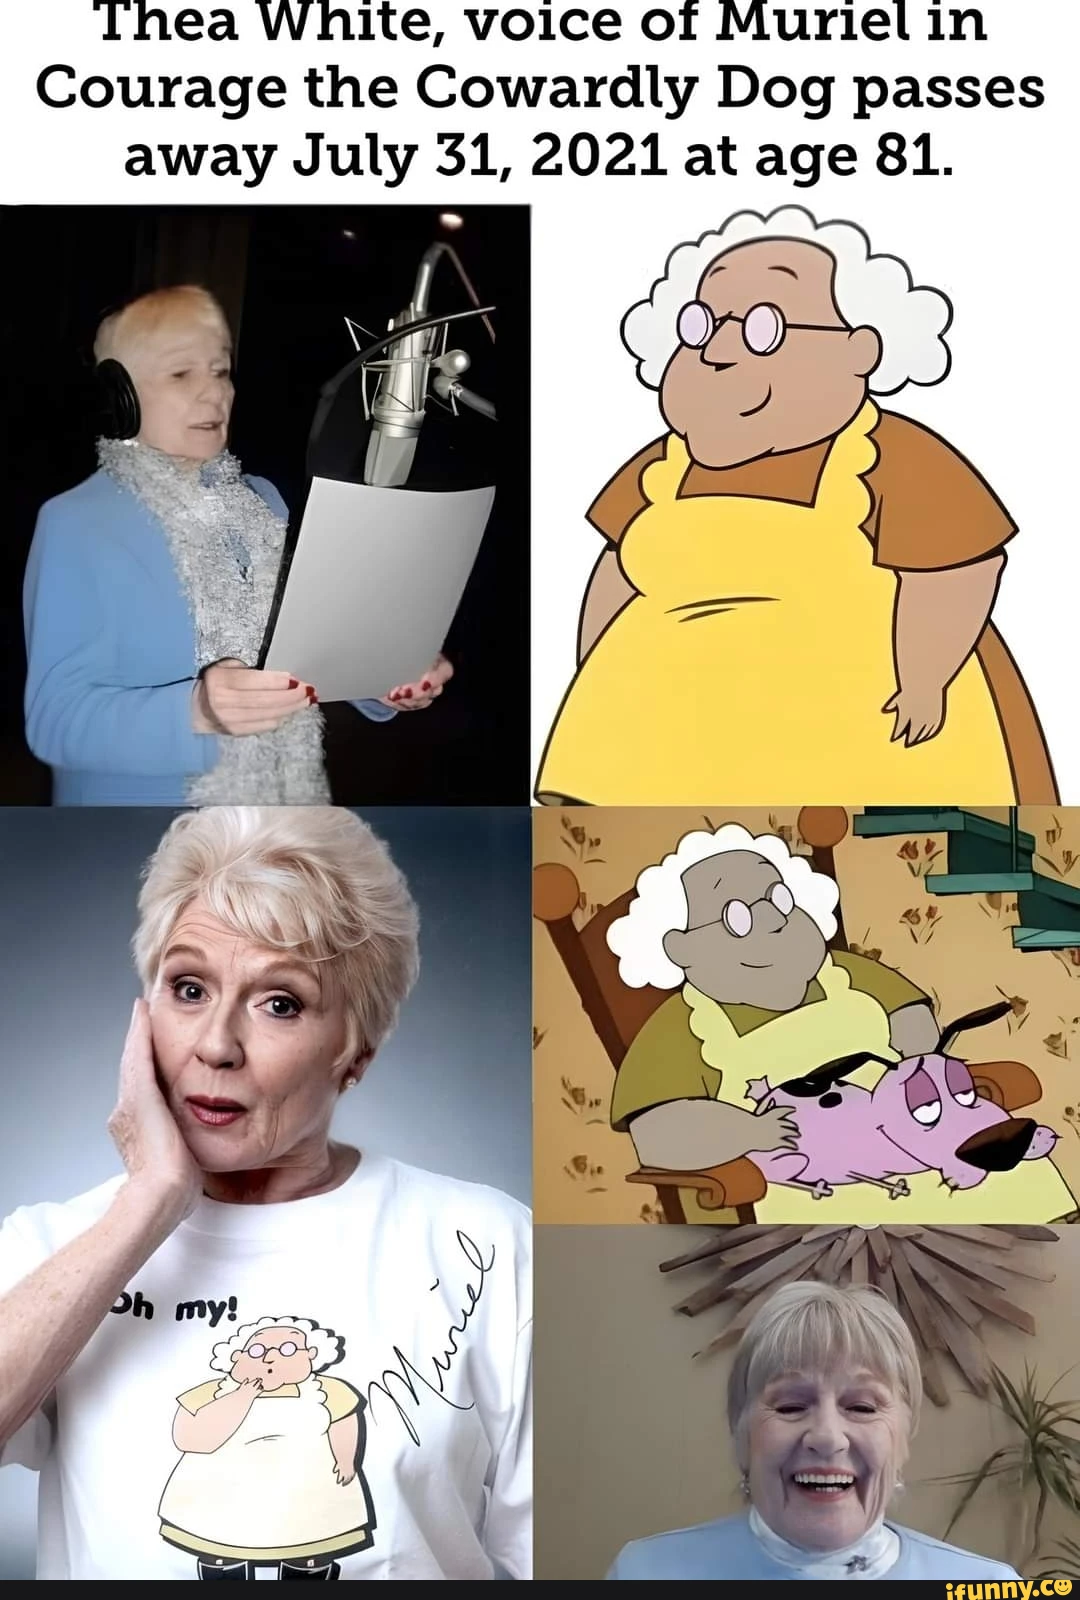 Thea White, voice of Muriel in Courage the Cowardly Dog passes away July 31, 2021 at age 81.